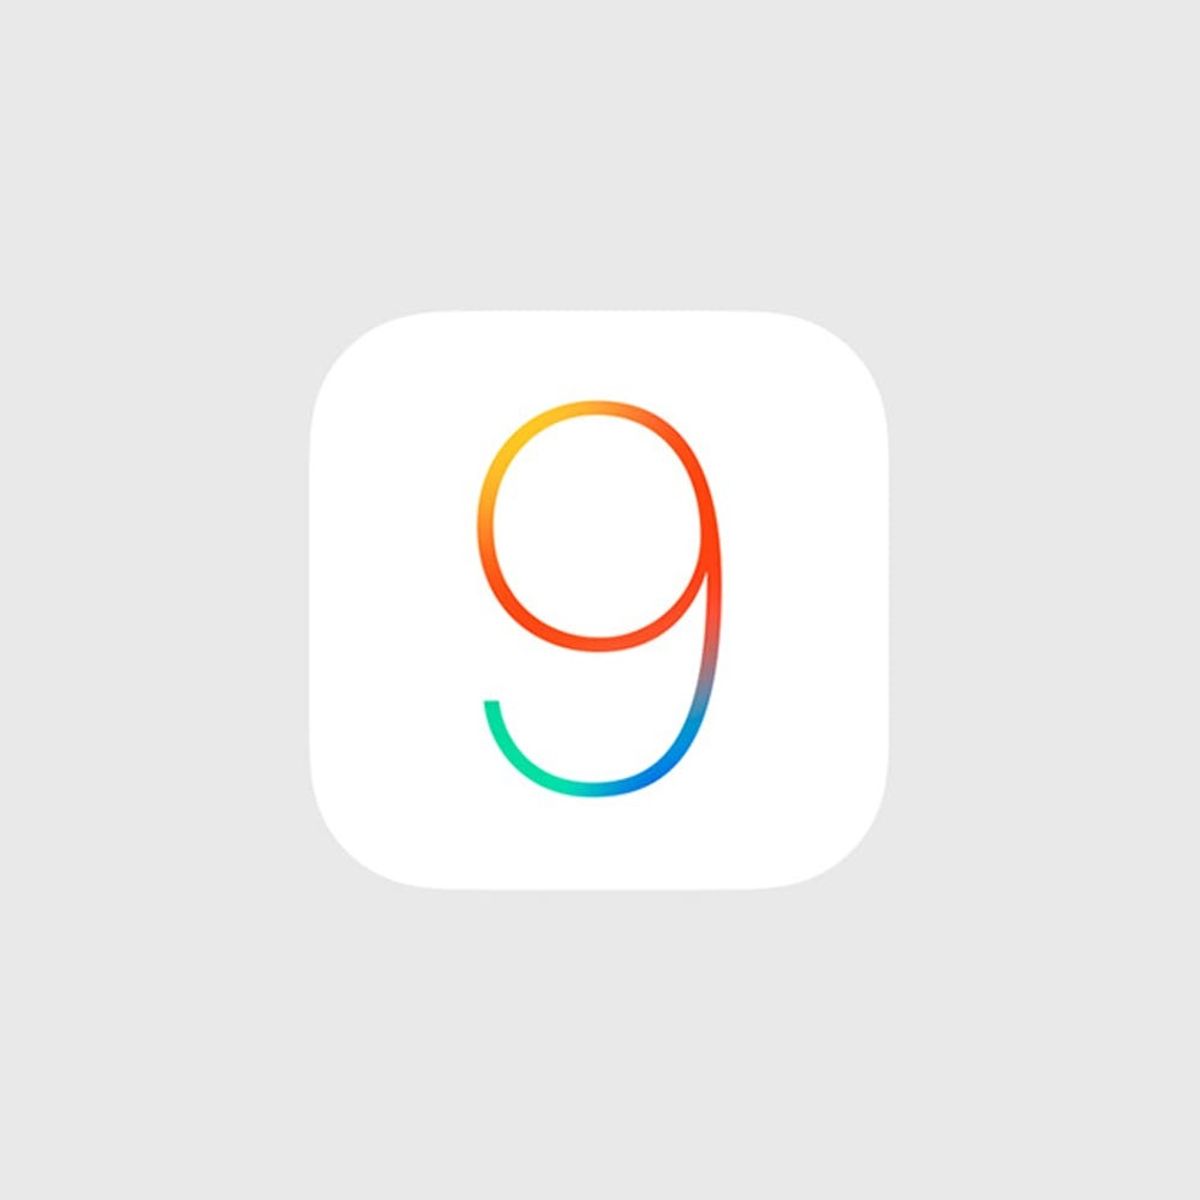 8 Major Upgrades Coming to Your iPhone With iOS 9